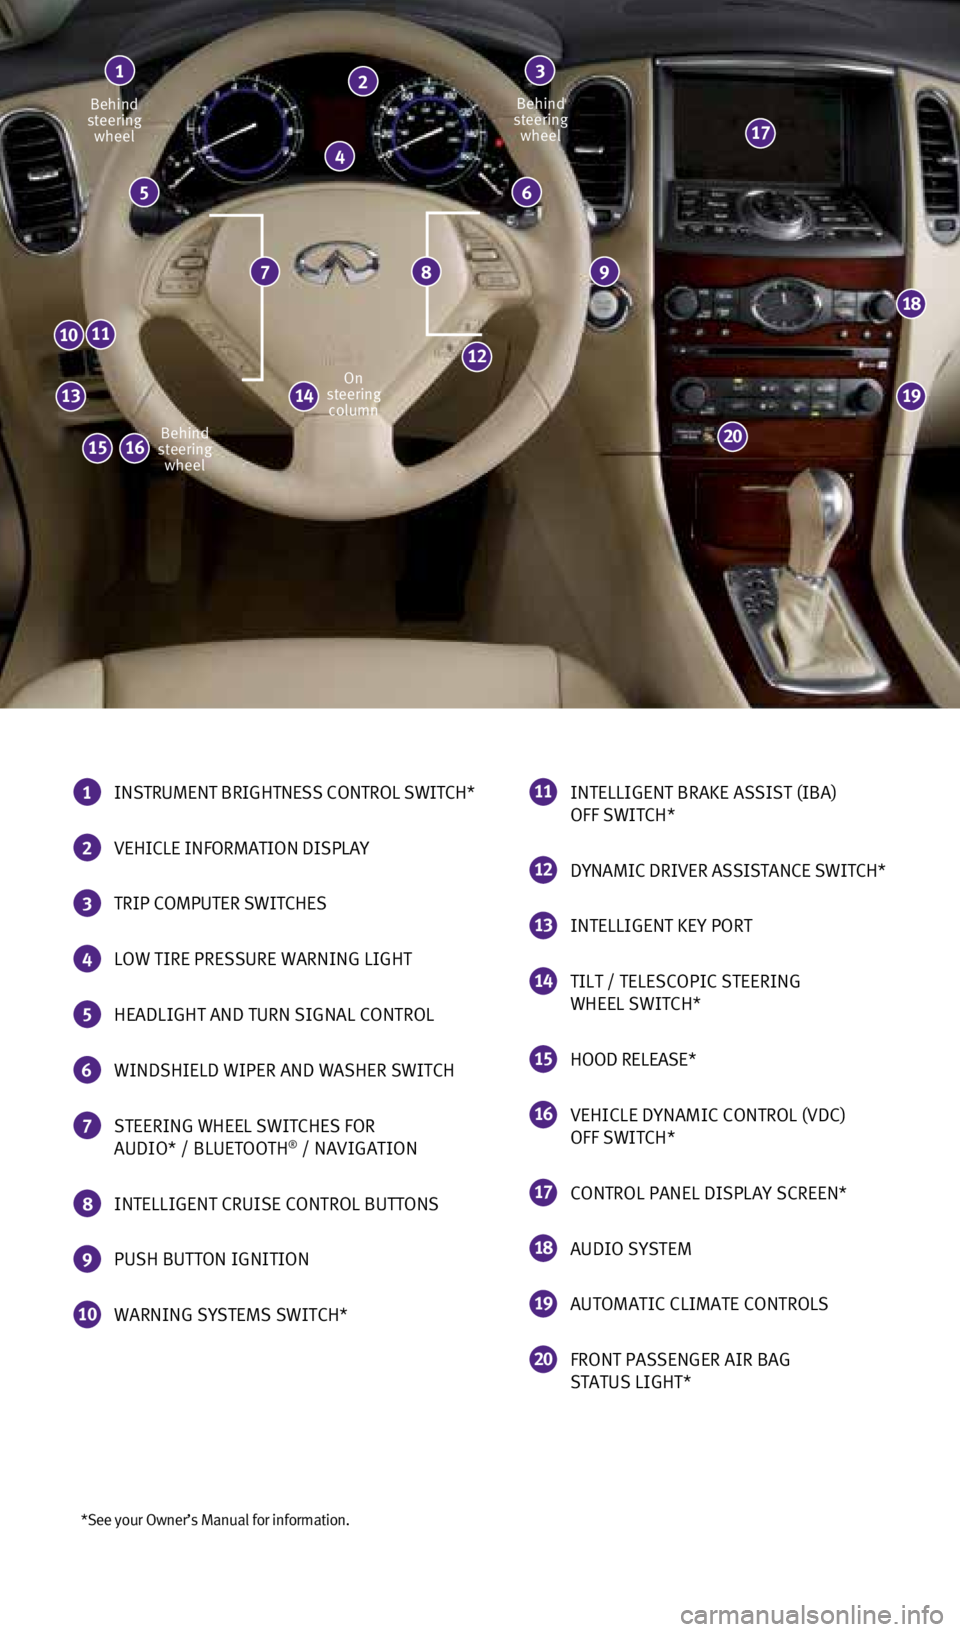 INFINITI QX50 2015  Quick Reference Guide *See your Owner’s Manual for information.
Behind 
steering  wheel Behind 
steering  wheel
On 
steering  column
Behind 
steering  wheel
1   INSTRUMENT BRIGHTNESS CONTROL SWITCH*
2 
VEHICLE INFORMATIO